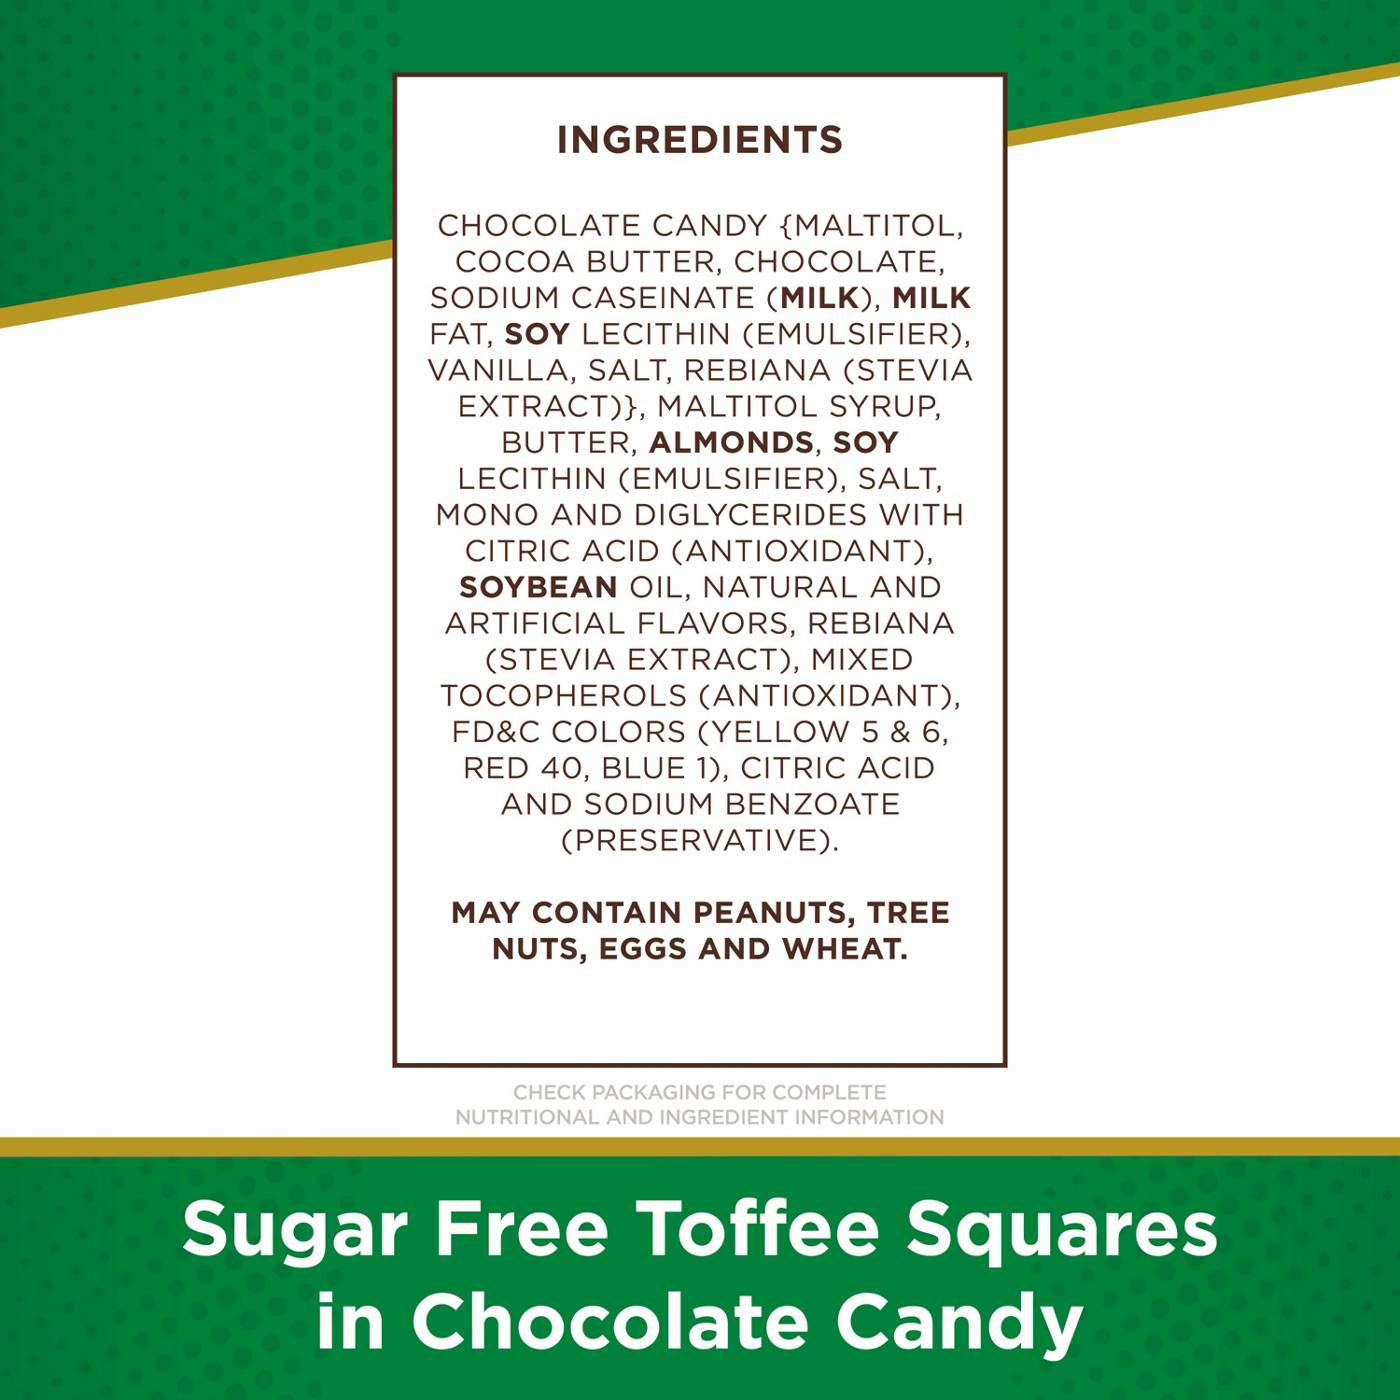 Russell Stover Sugar Free Toffee Squares; image 4 of 8